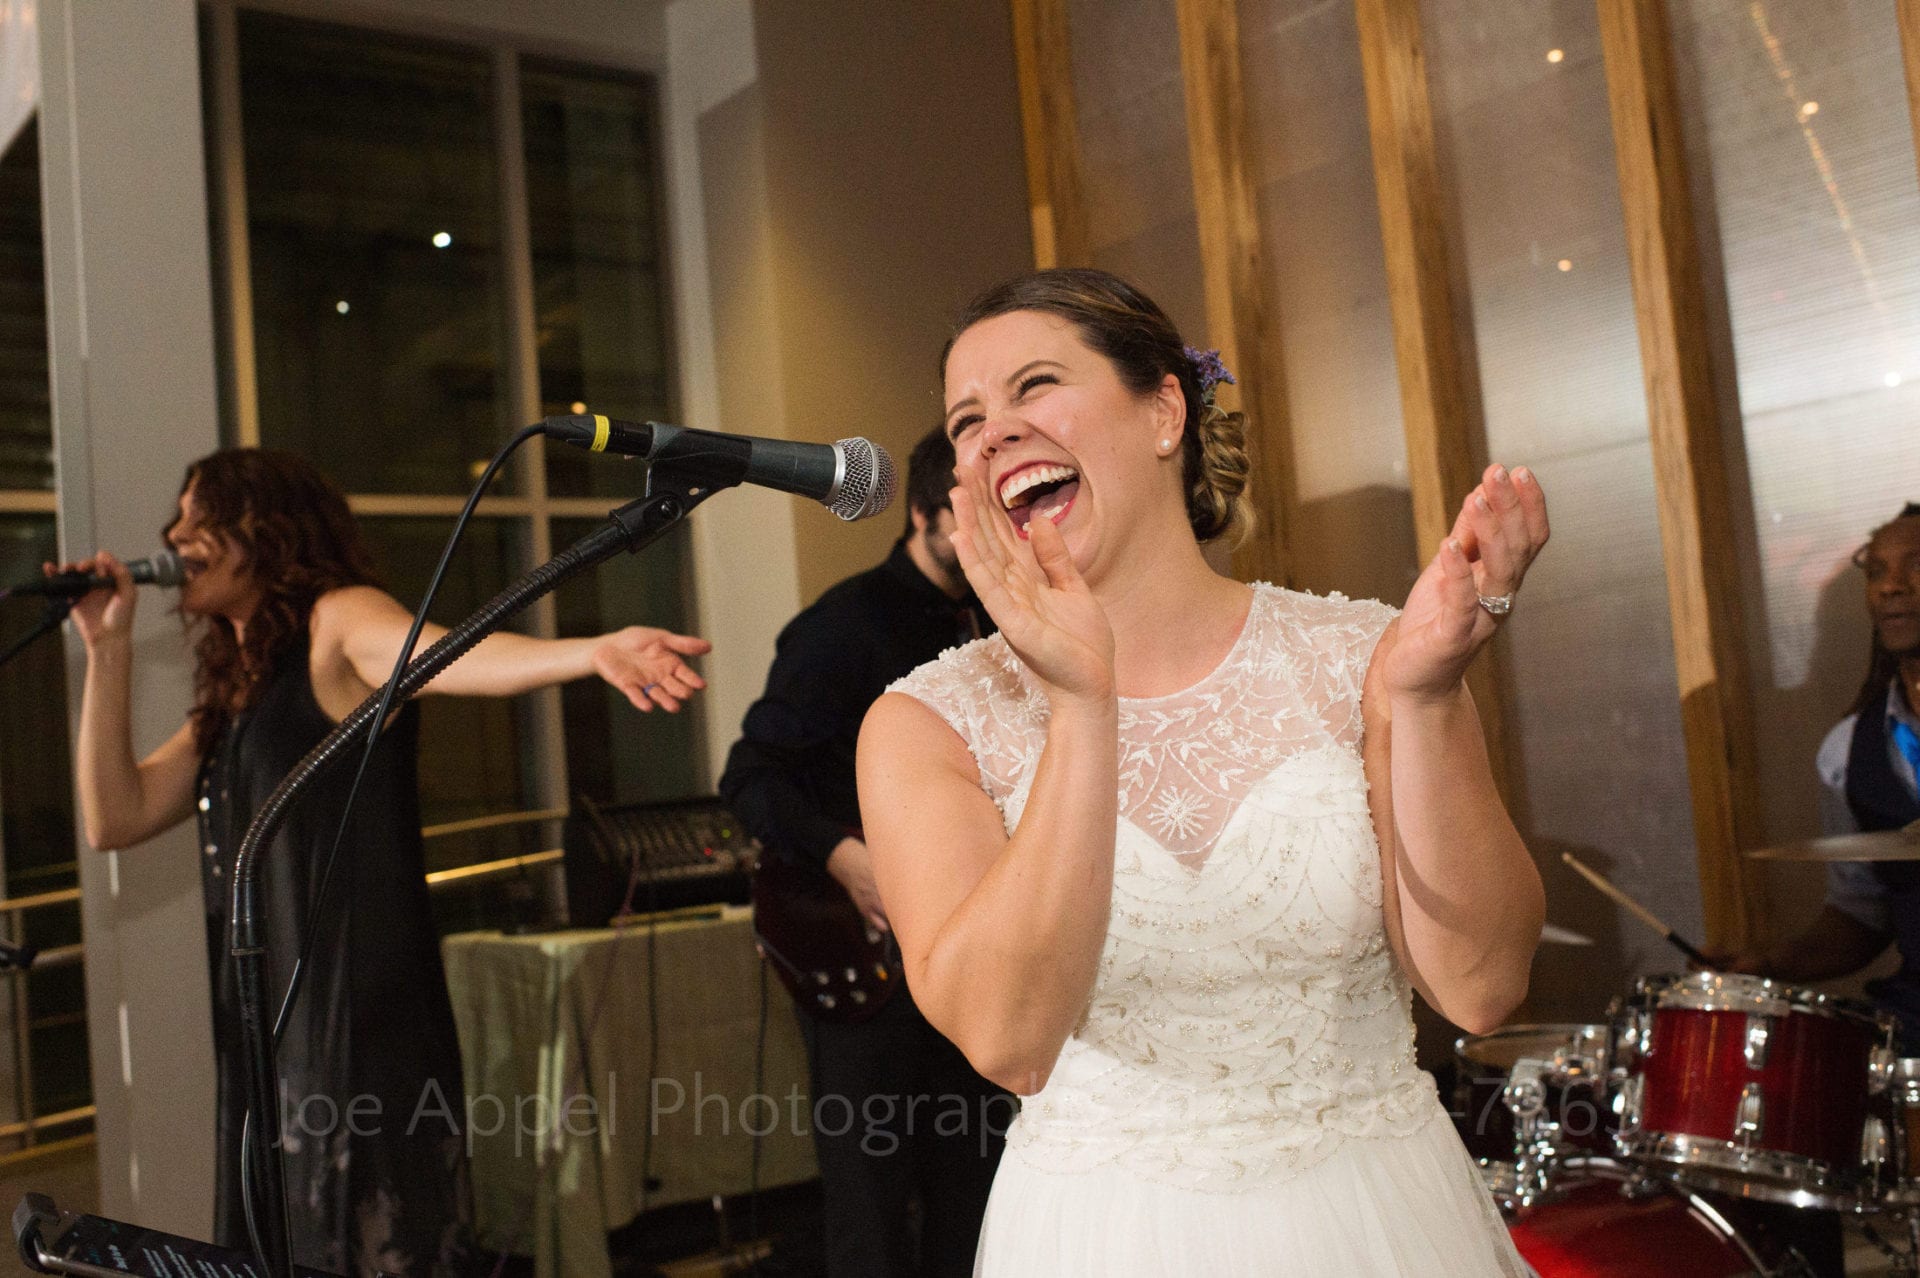 A bride laughs and claps her hands as she sings a song into a microphone.